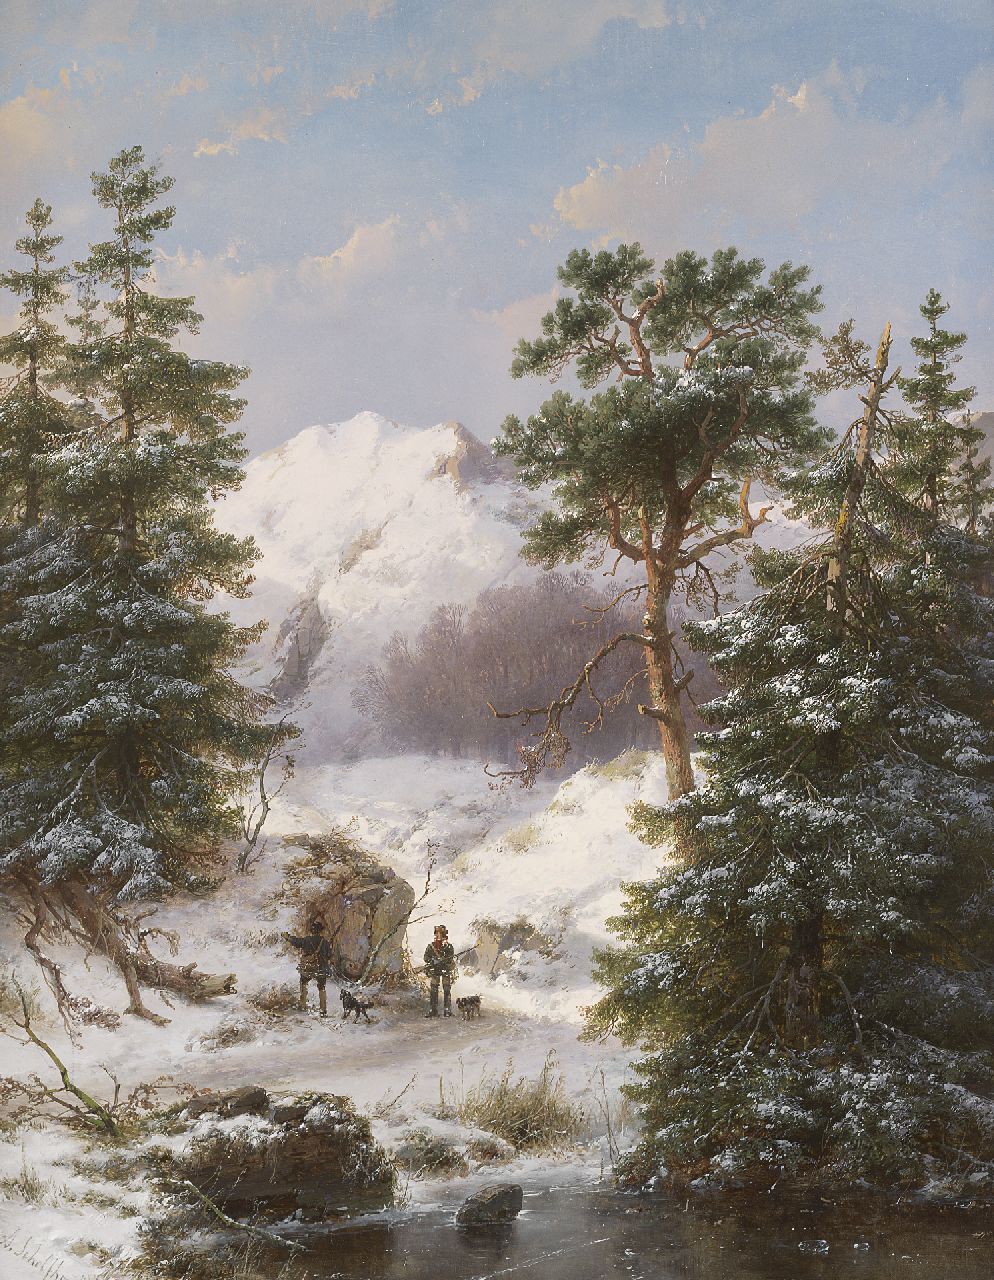 Schelfhout A.  | Andreas Schelfhout, Hunters in a mountain landscape, Öl auf Holz 62,4 x 48,0 cm, signed l.l. und painted '55